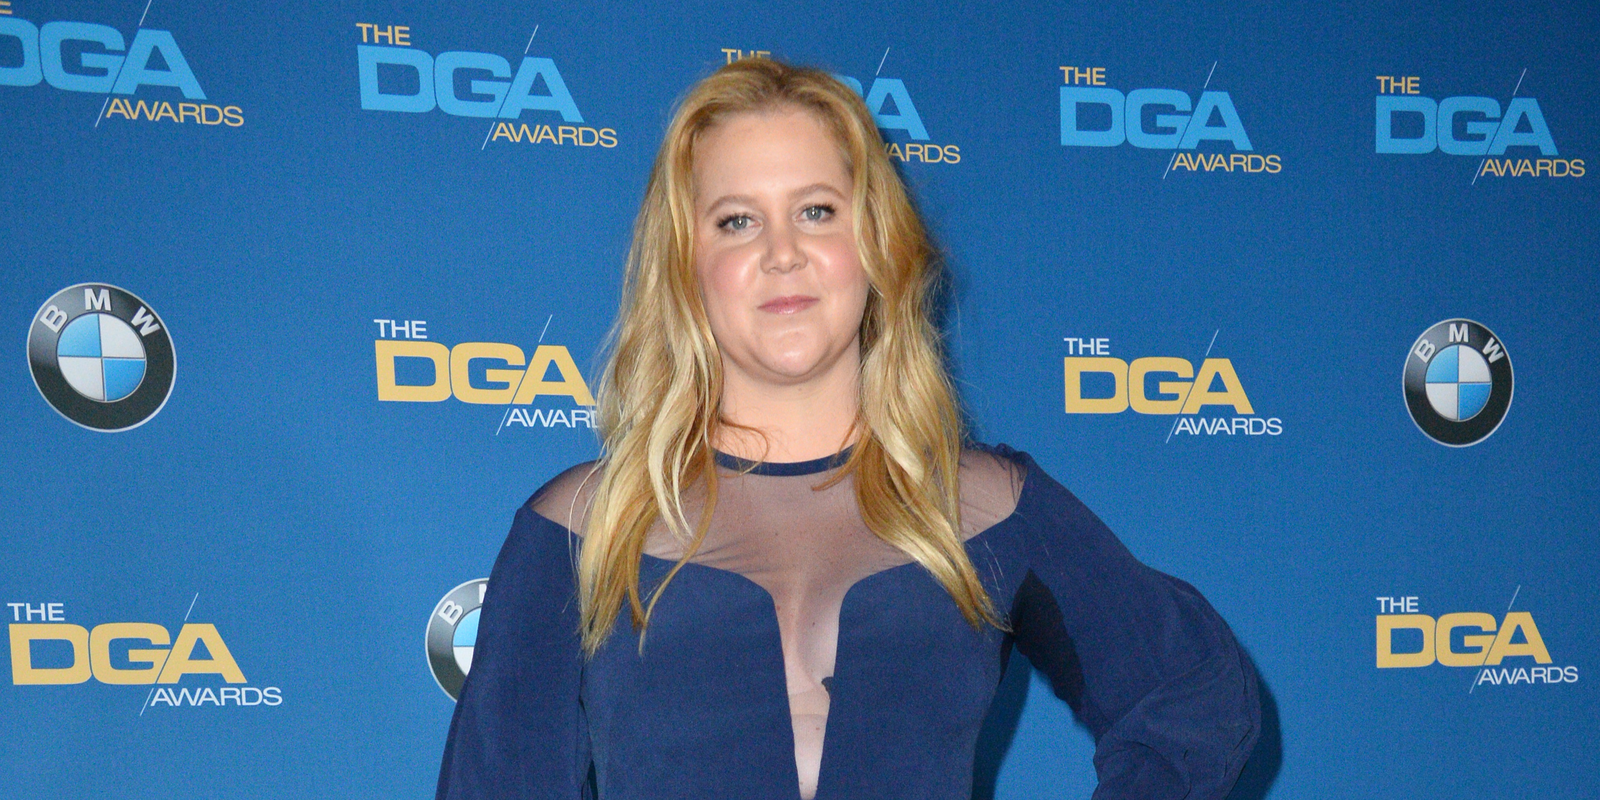 Negative Reactions to Amy Schumer's Instagram Post Criticizing Nicole Kidman at the US Open